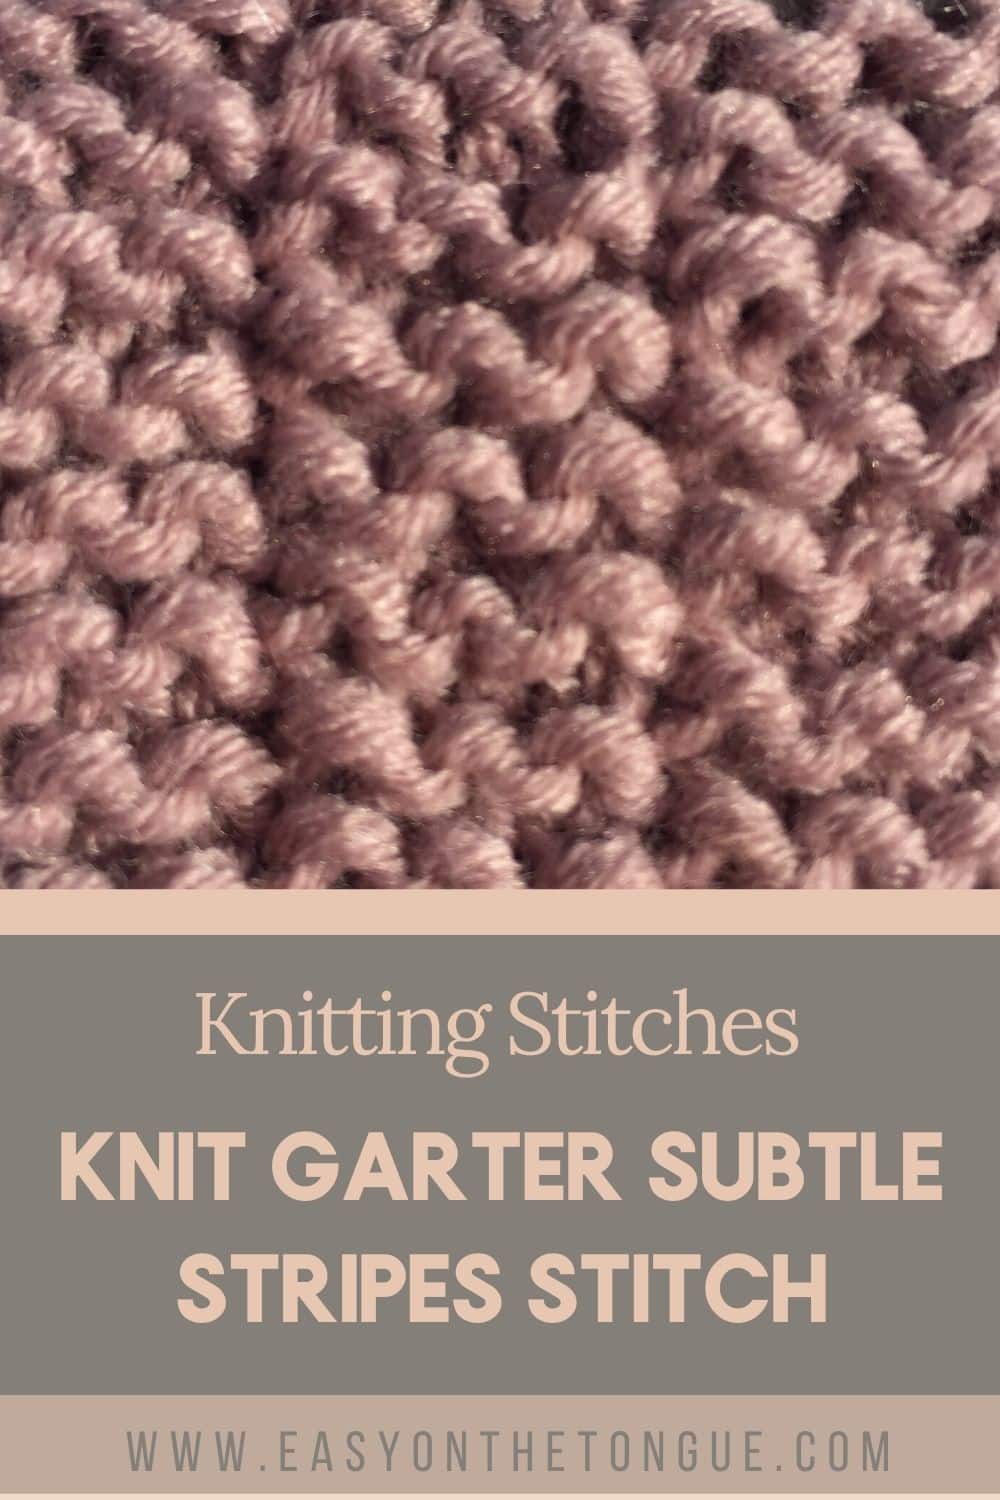 How to knit Garter Subtle Stripes garterstripes garterstitch knittingstitches Garter Subtle Stripes, an easy knitting stitch